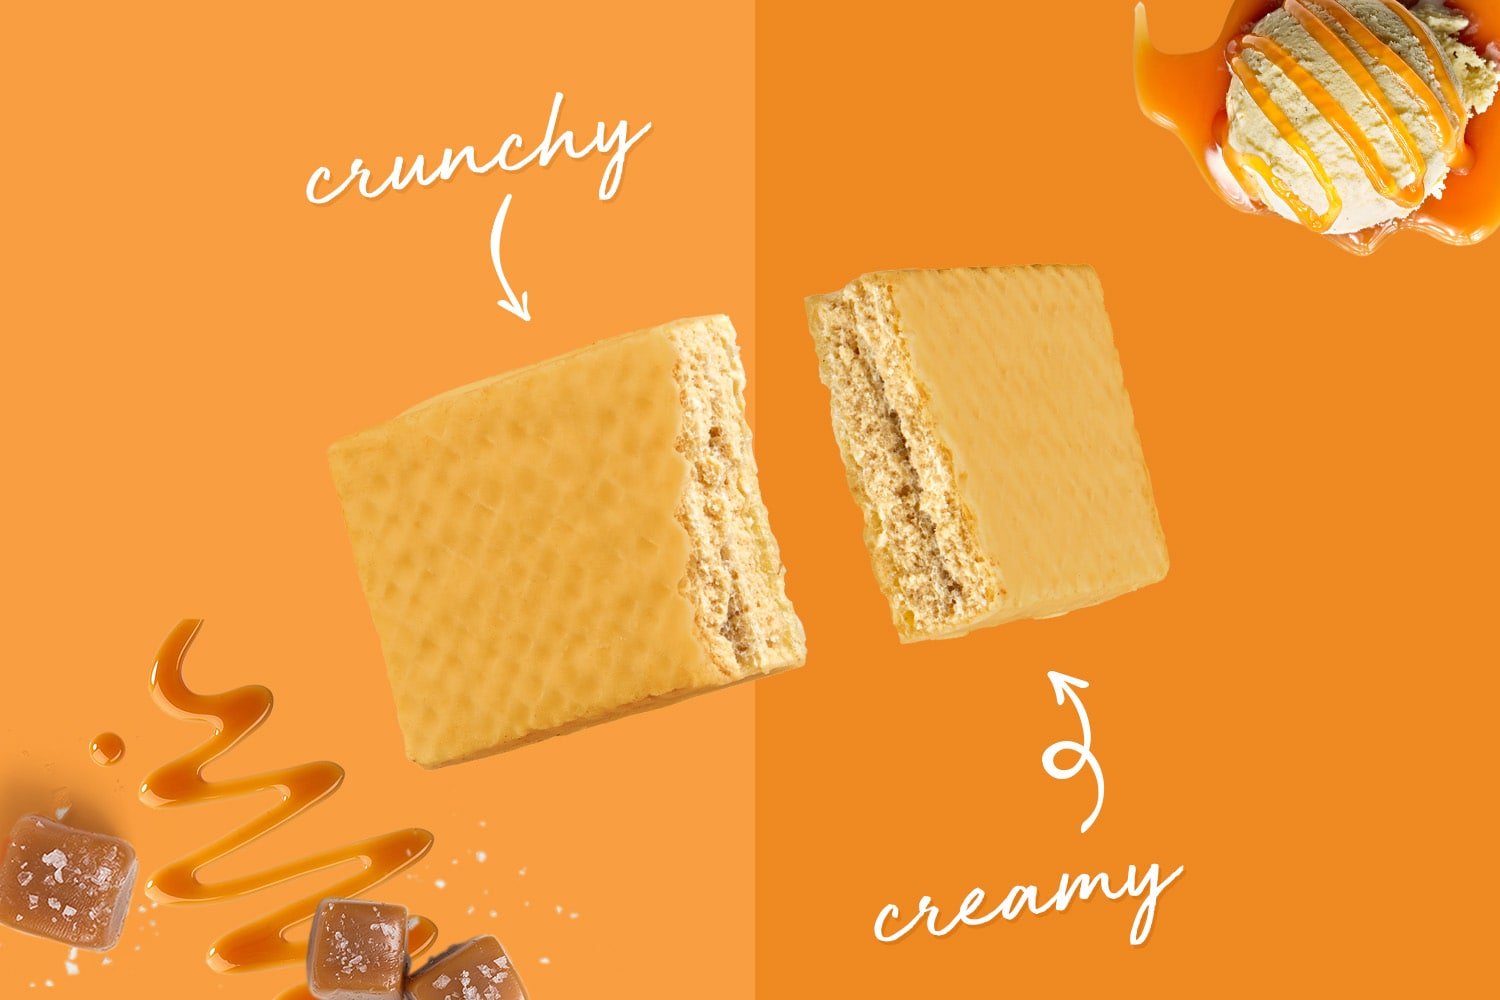 Creamy and crunchy wafer protein bars in PRO Salted Caramel